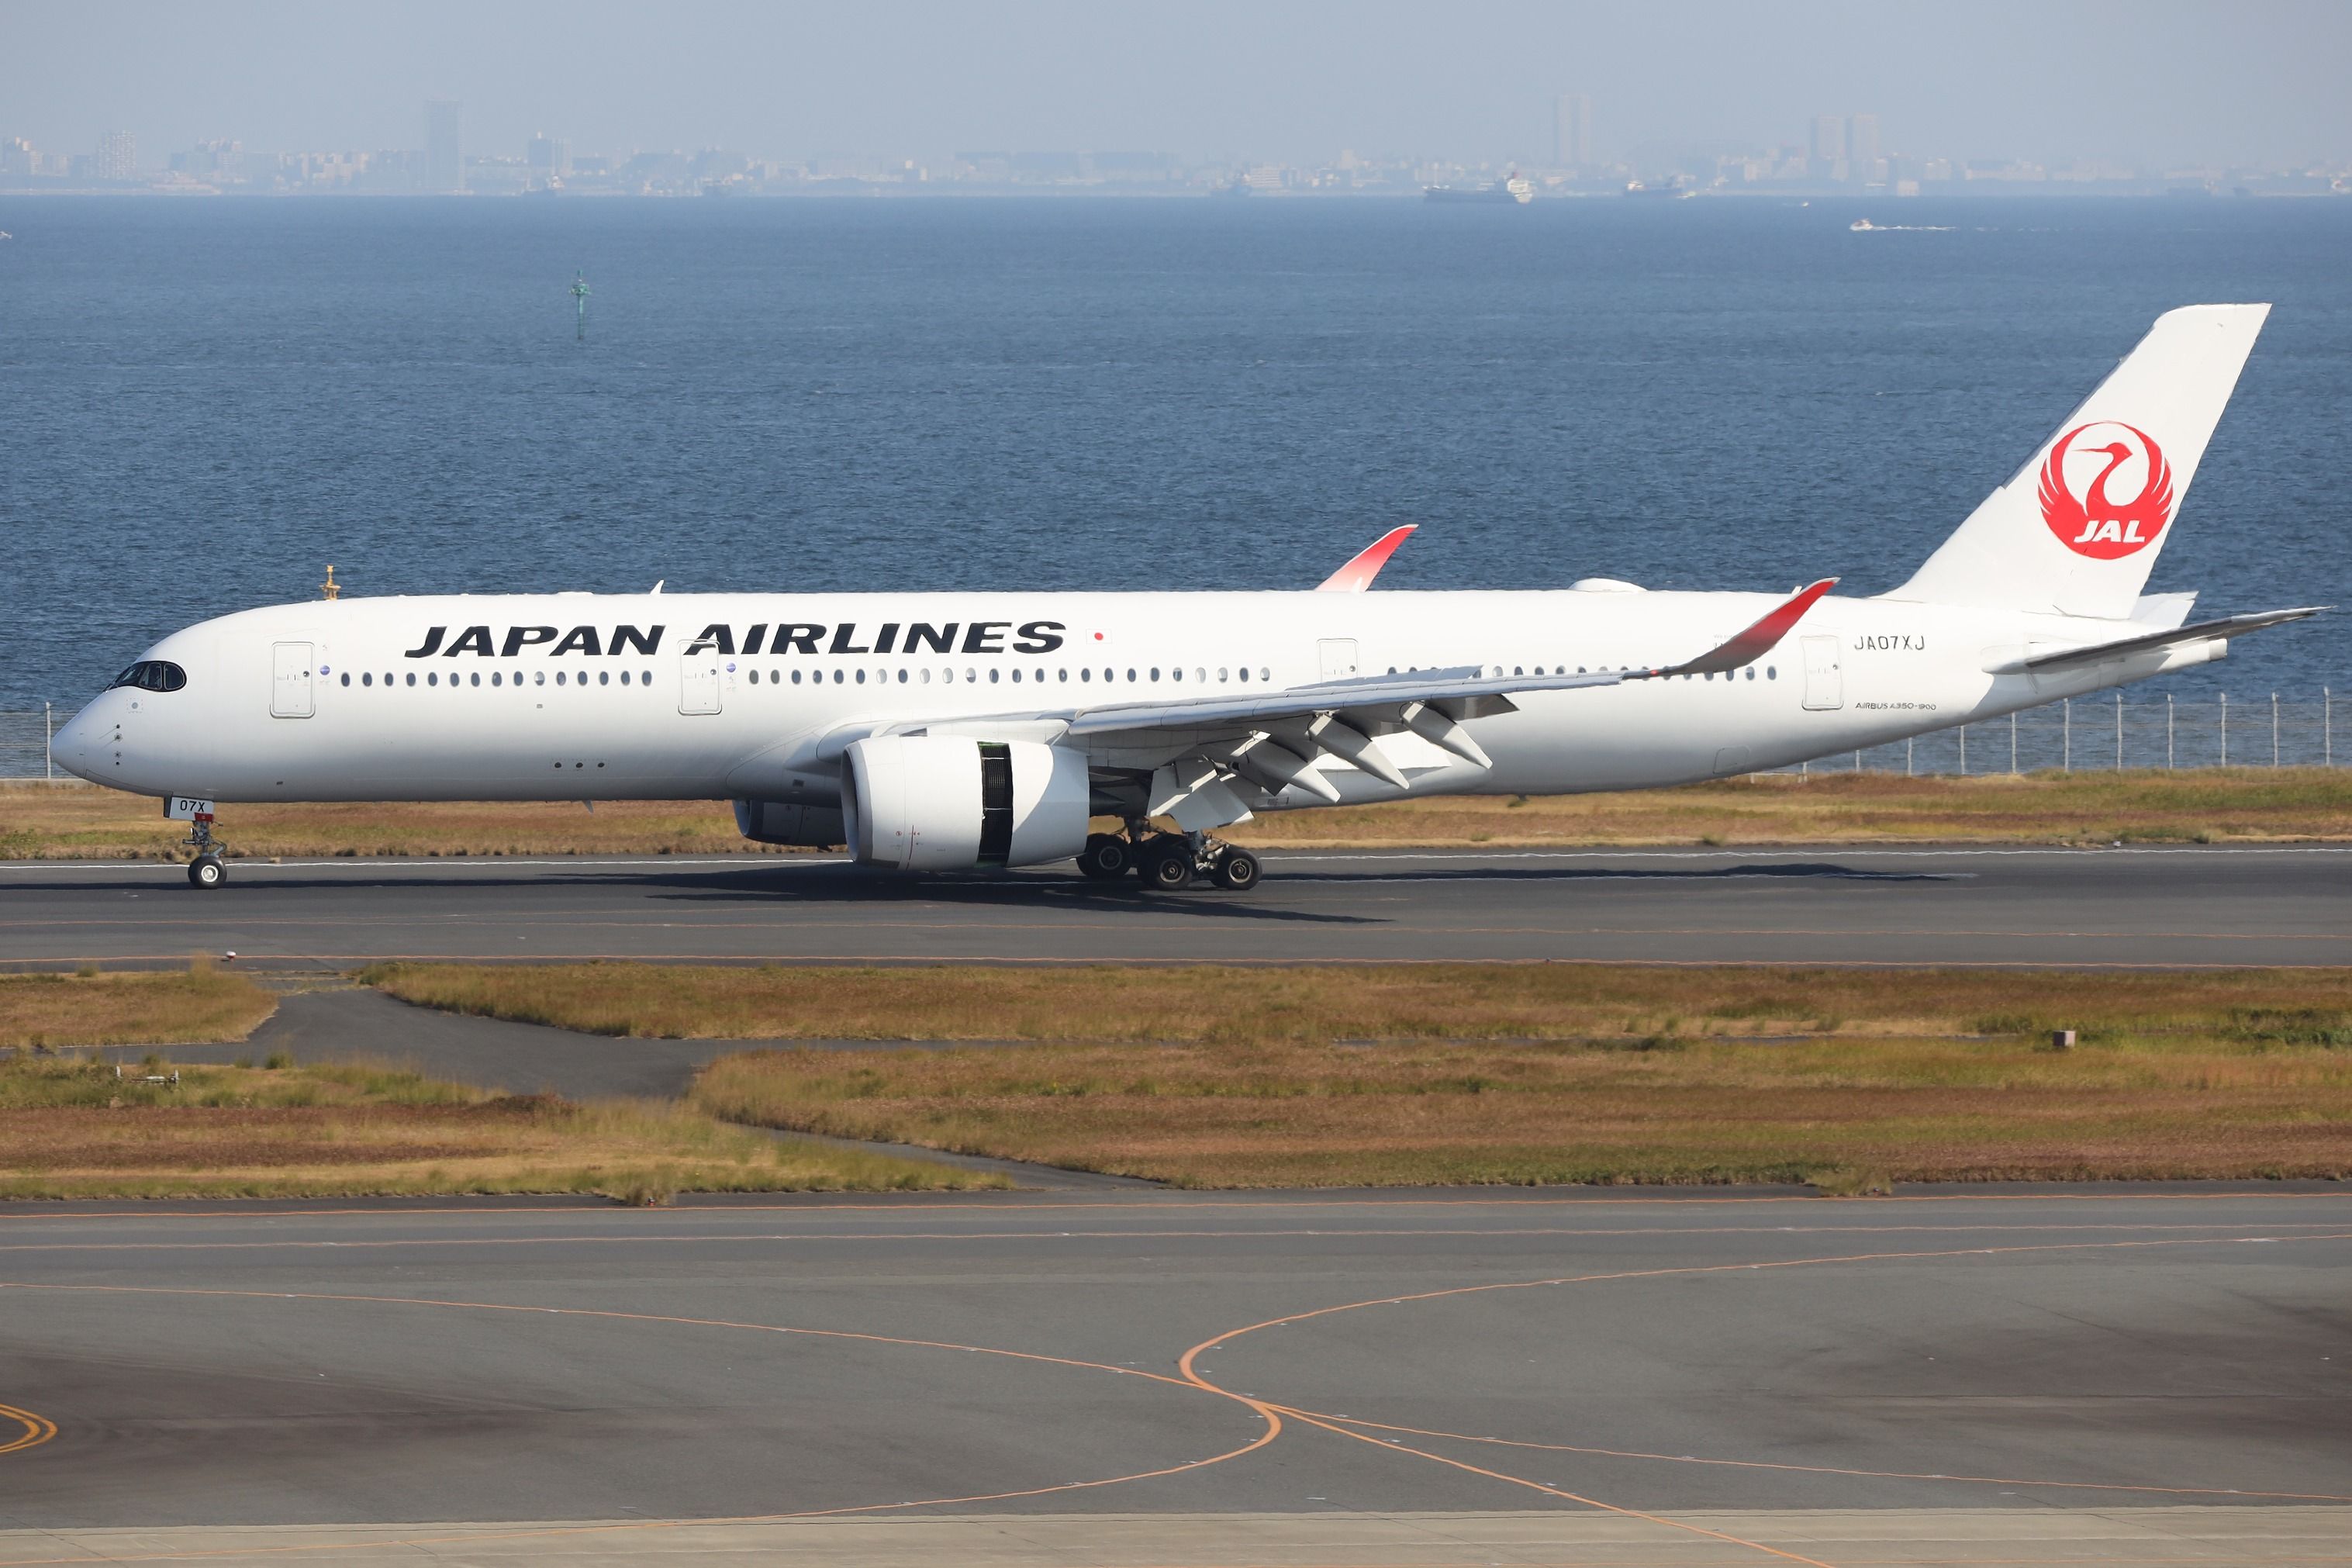 Japan Airlines Airbus A350 landing